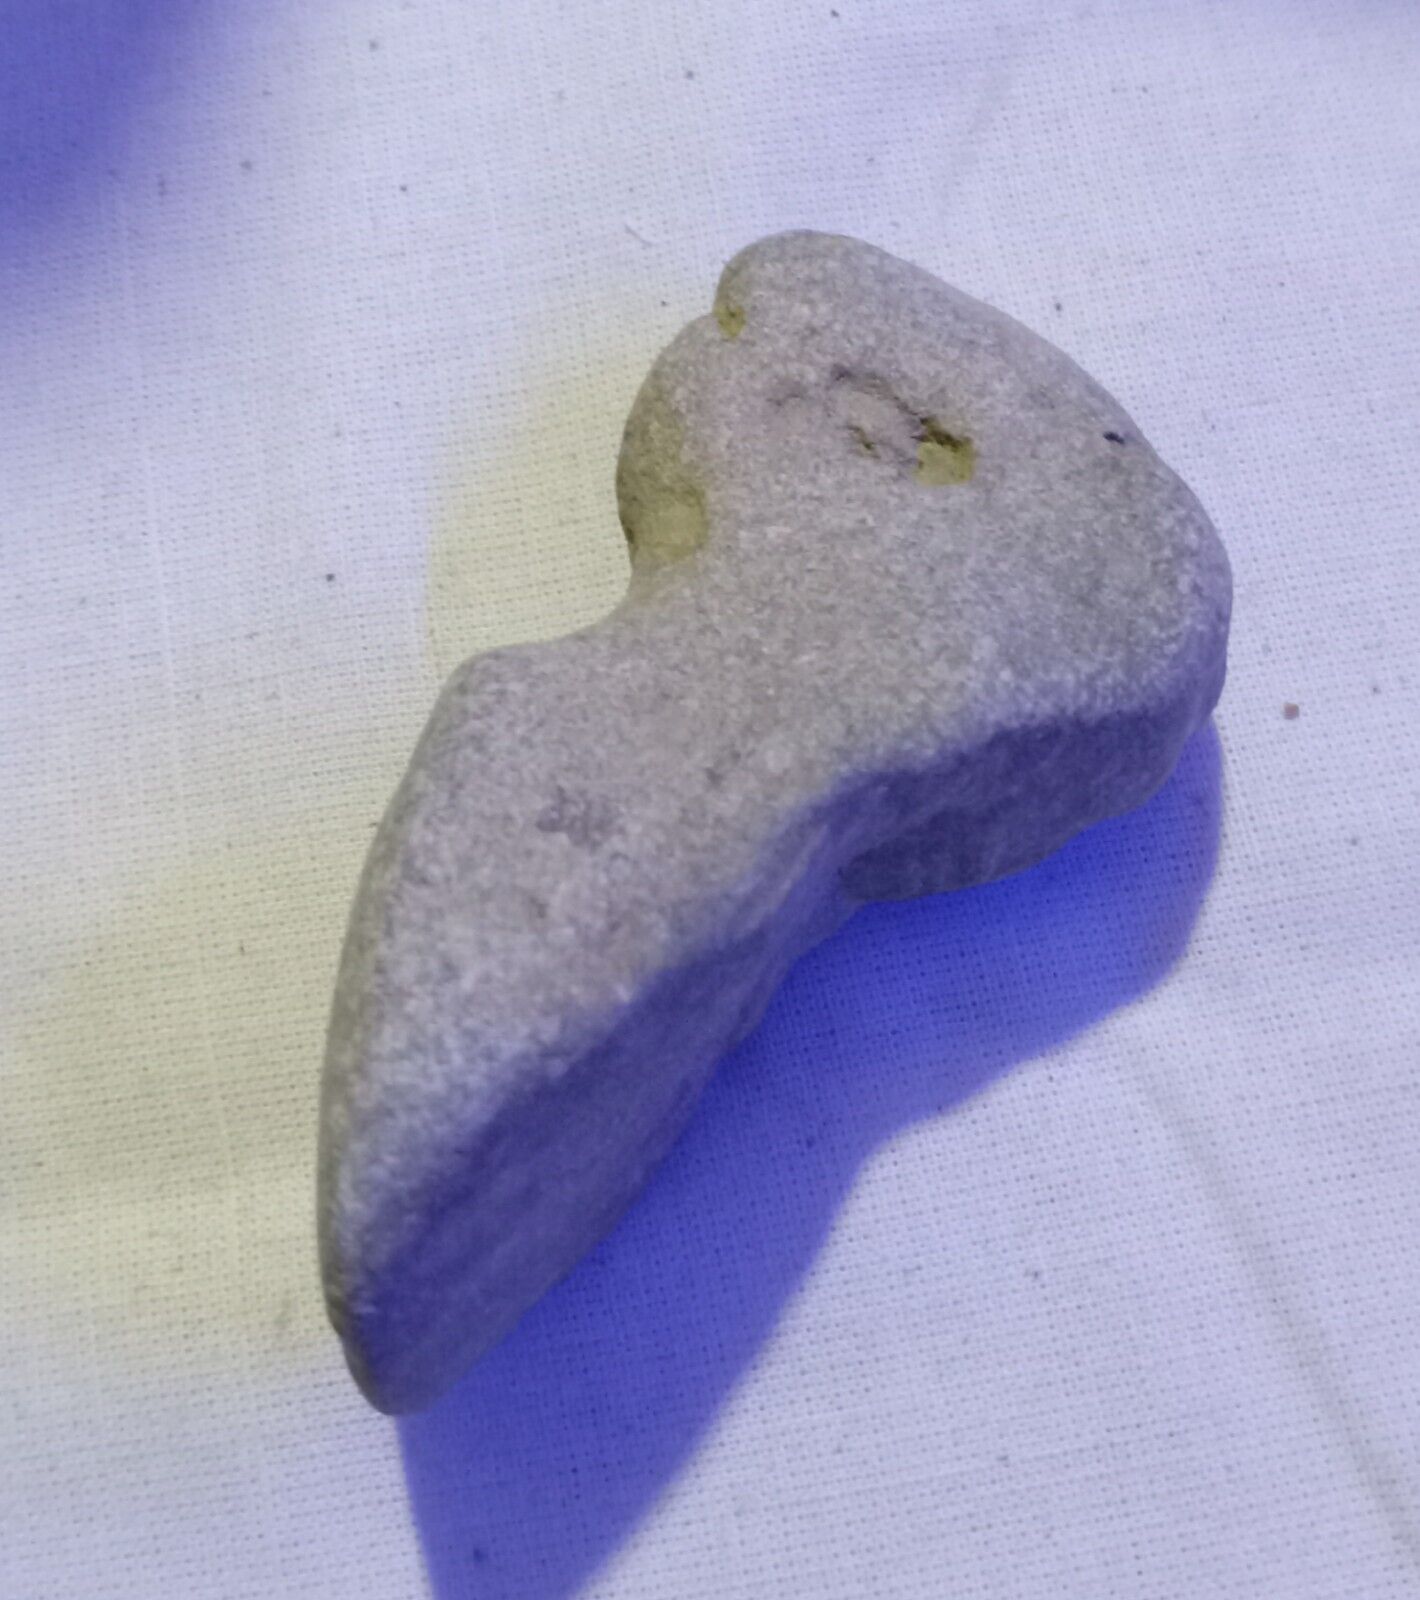 Native American Paleo Indian Artifact Unique Stone Tool Very Rare Franklin...